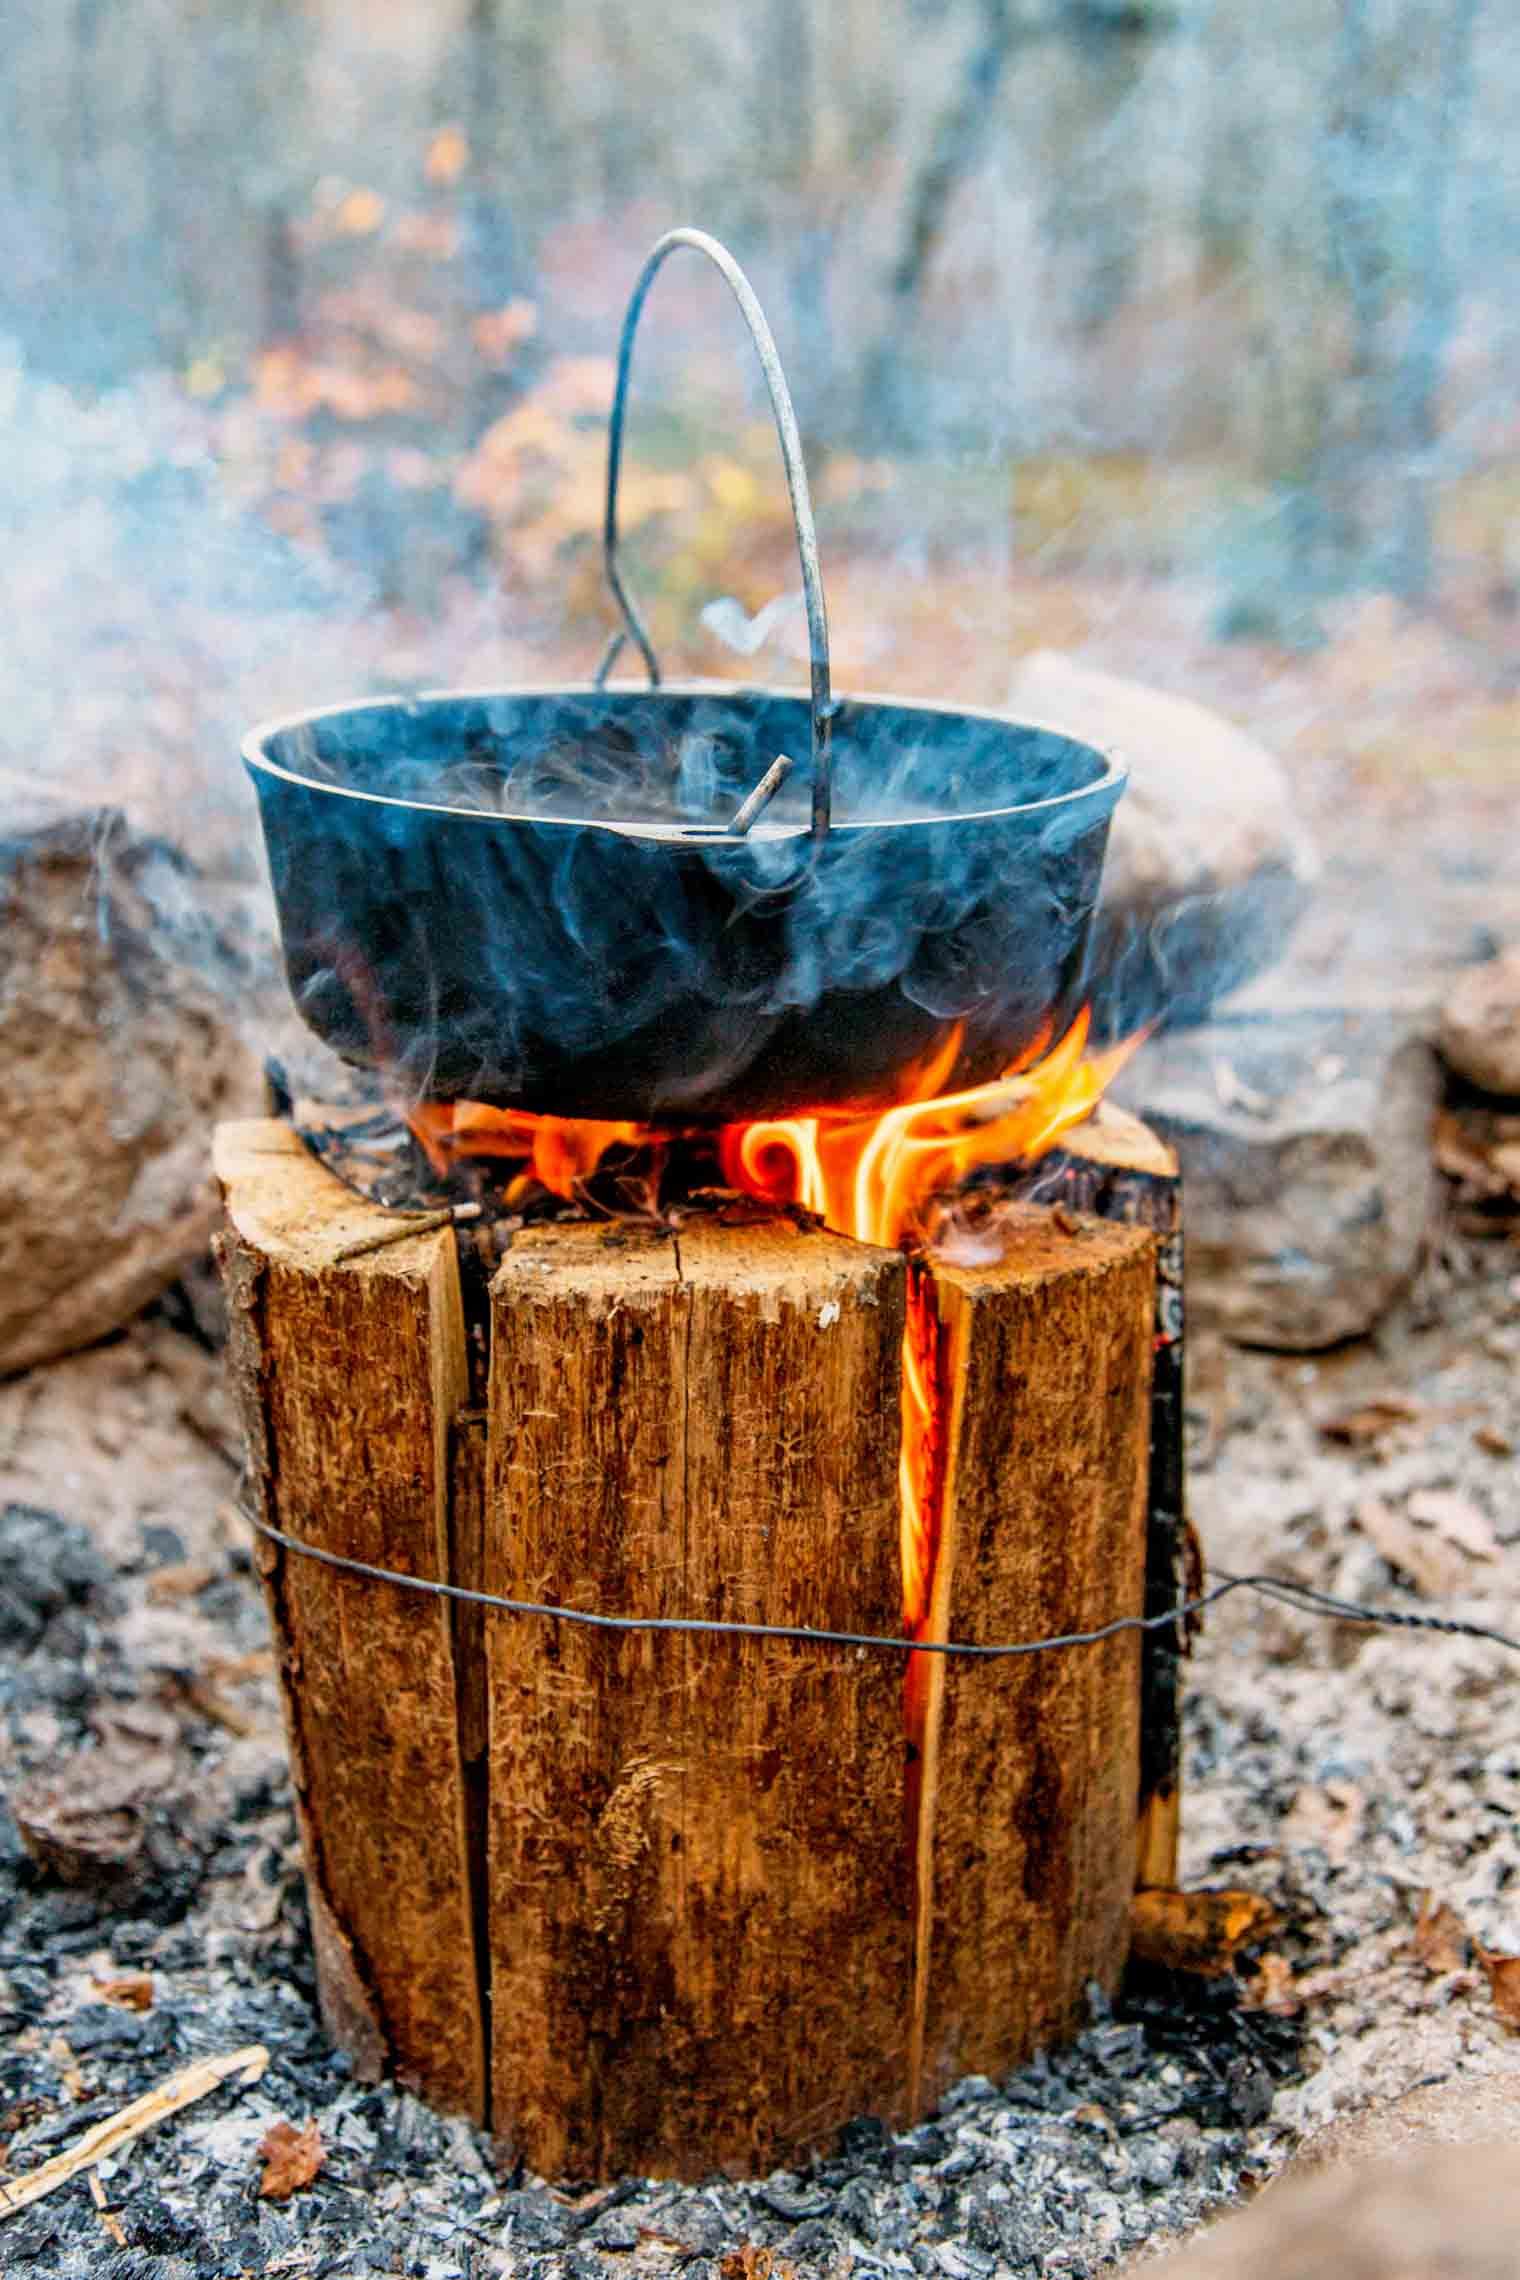 How to Make a Swedish Fire Log | Chainsaw, Bonfires and Torches